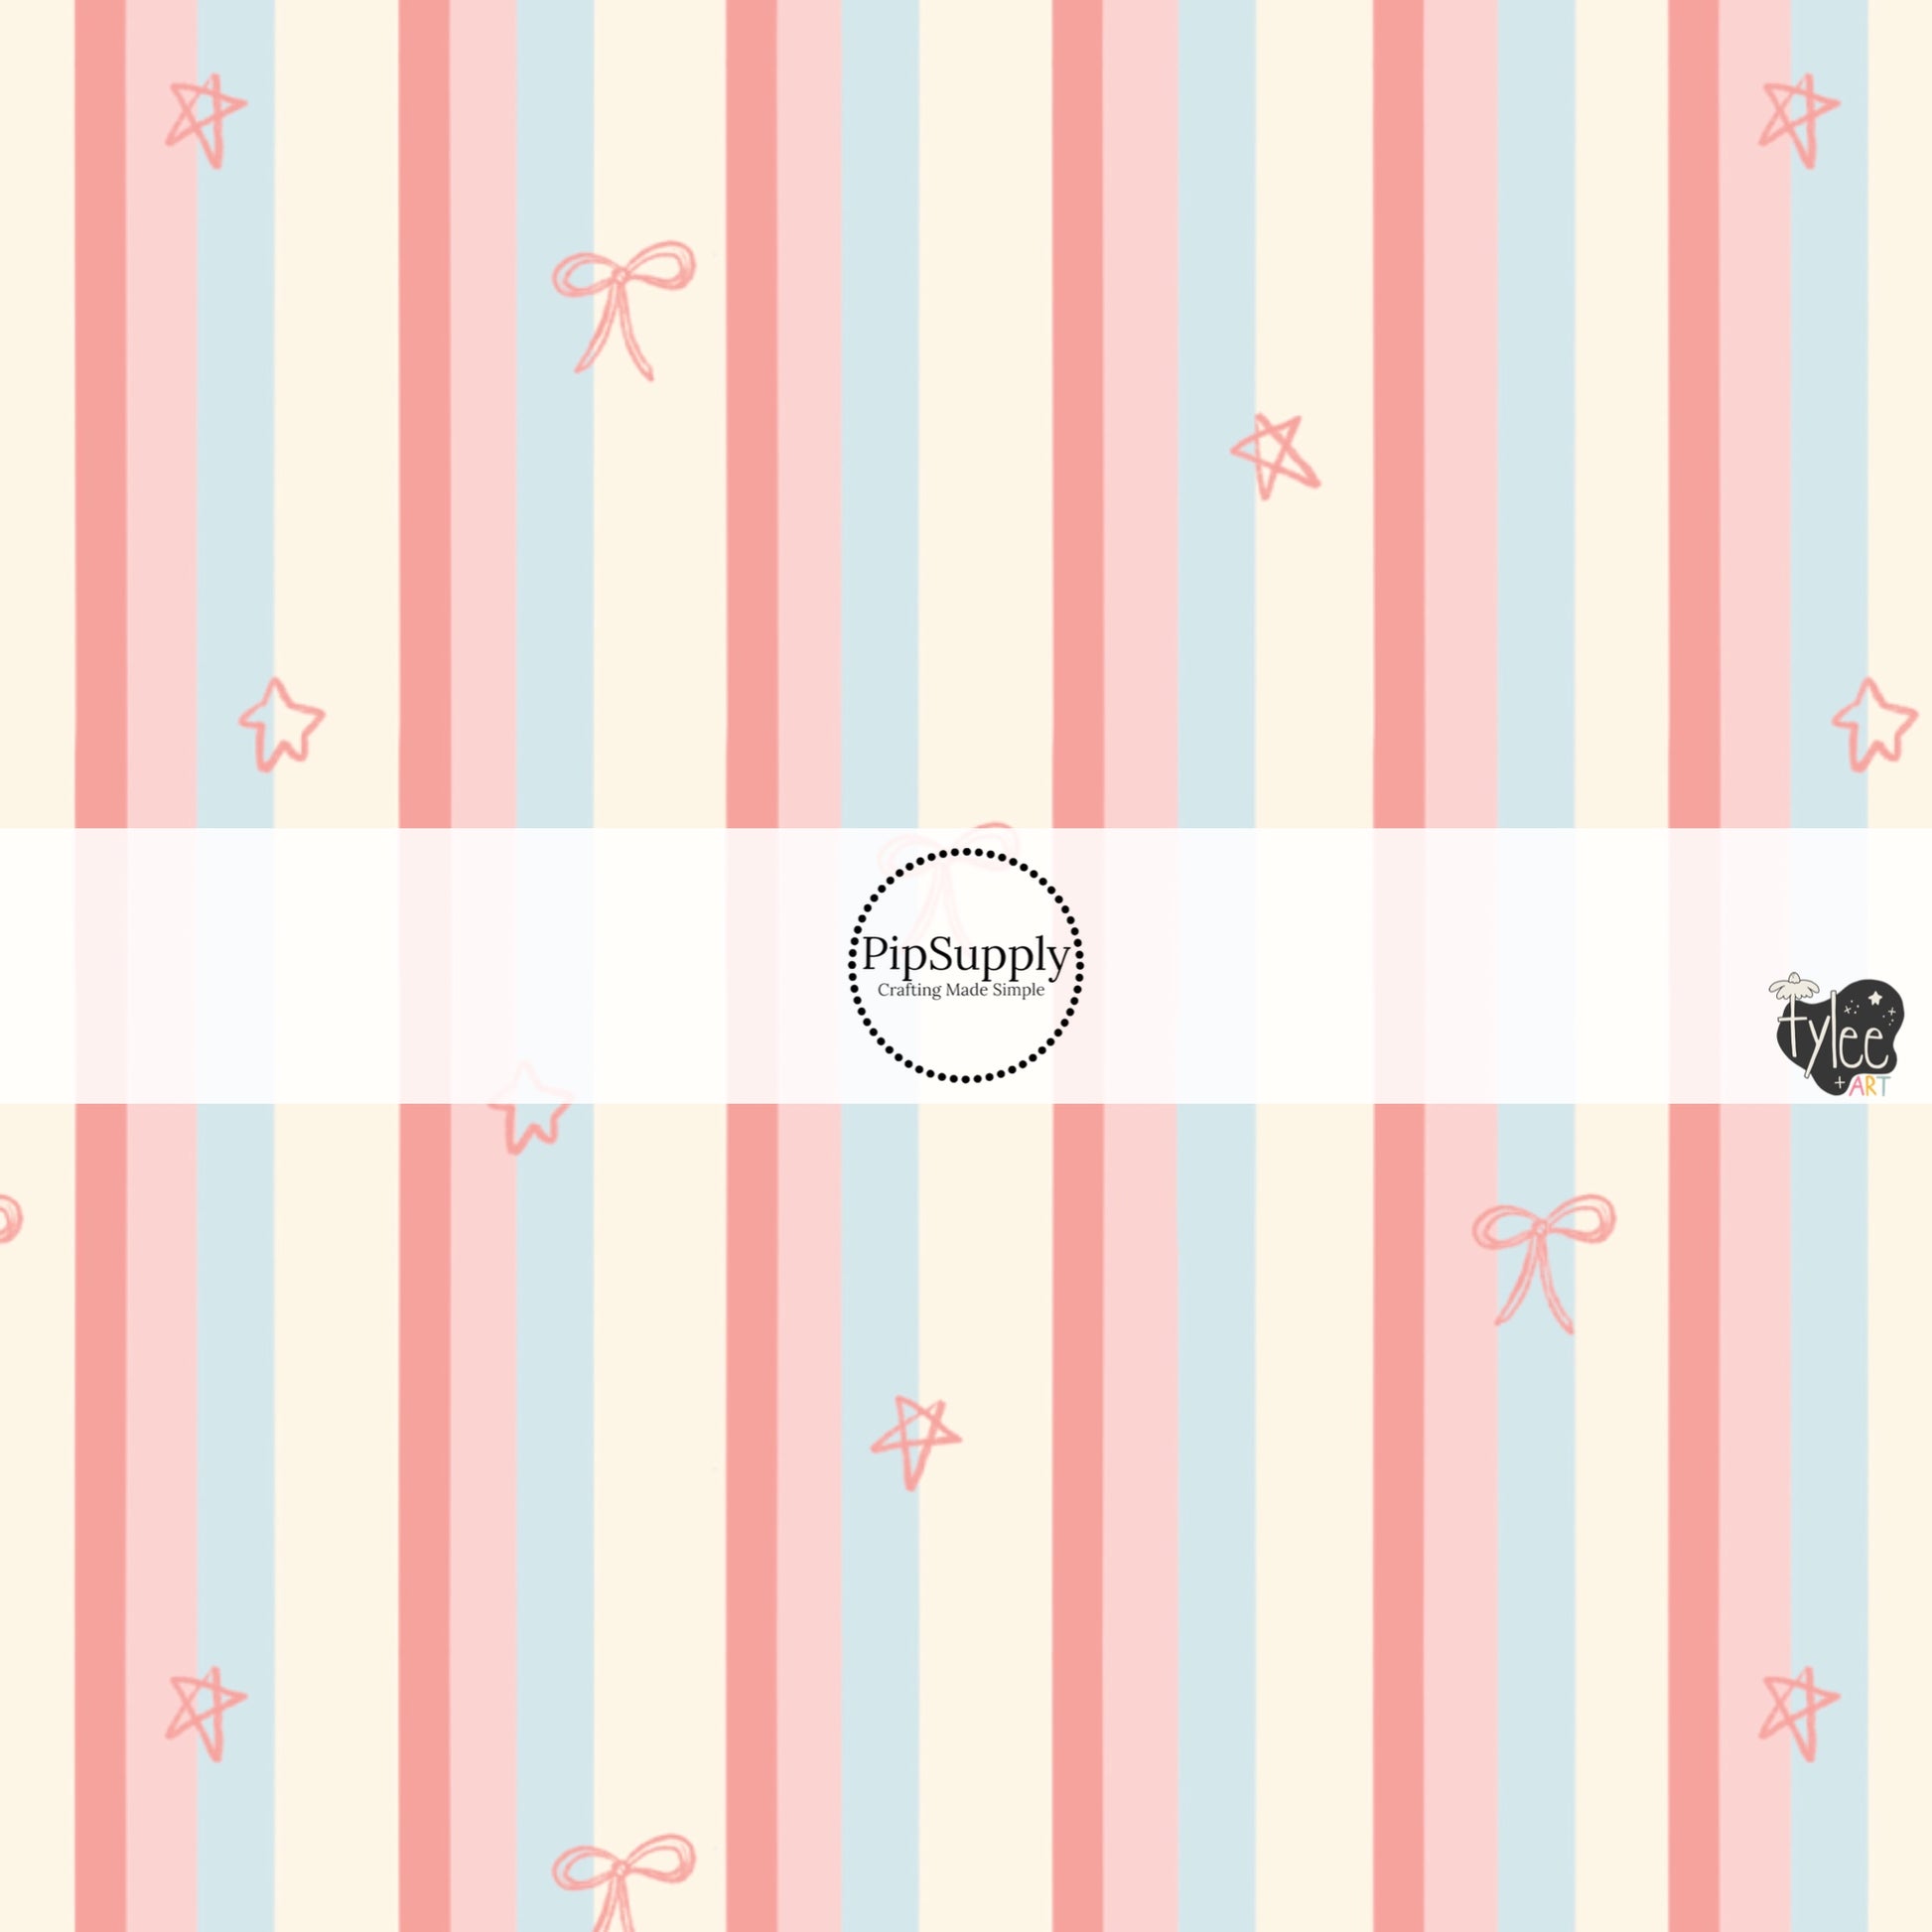 Bows and Stars on Cream, Pink, and Blue Stripes Fabric by the Yard.